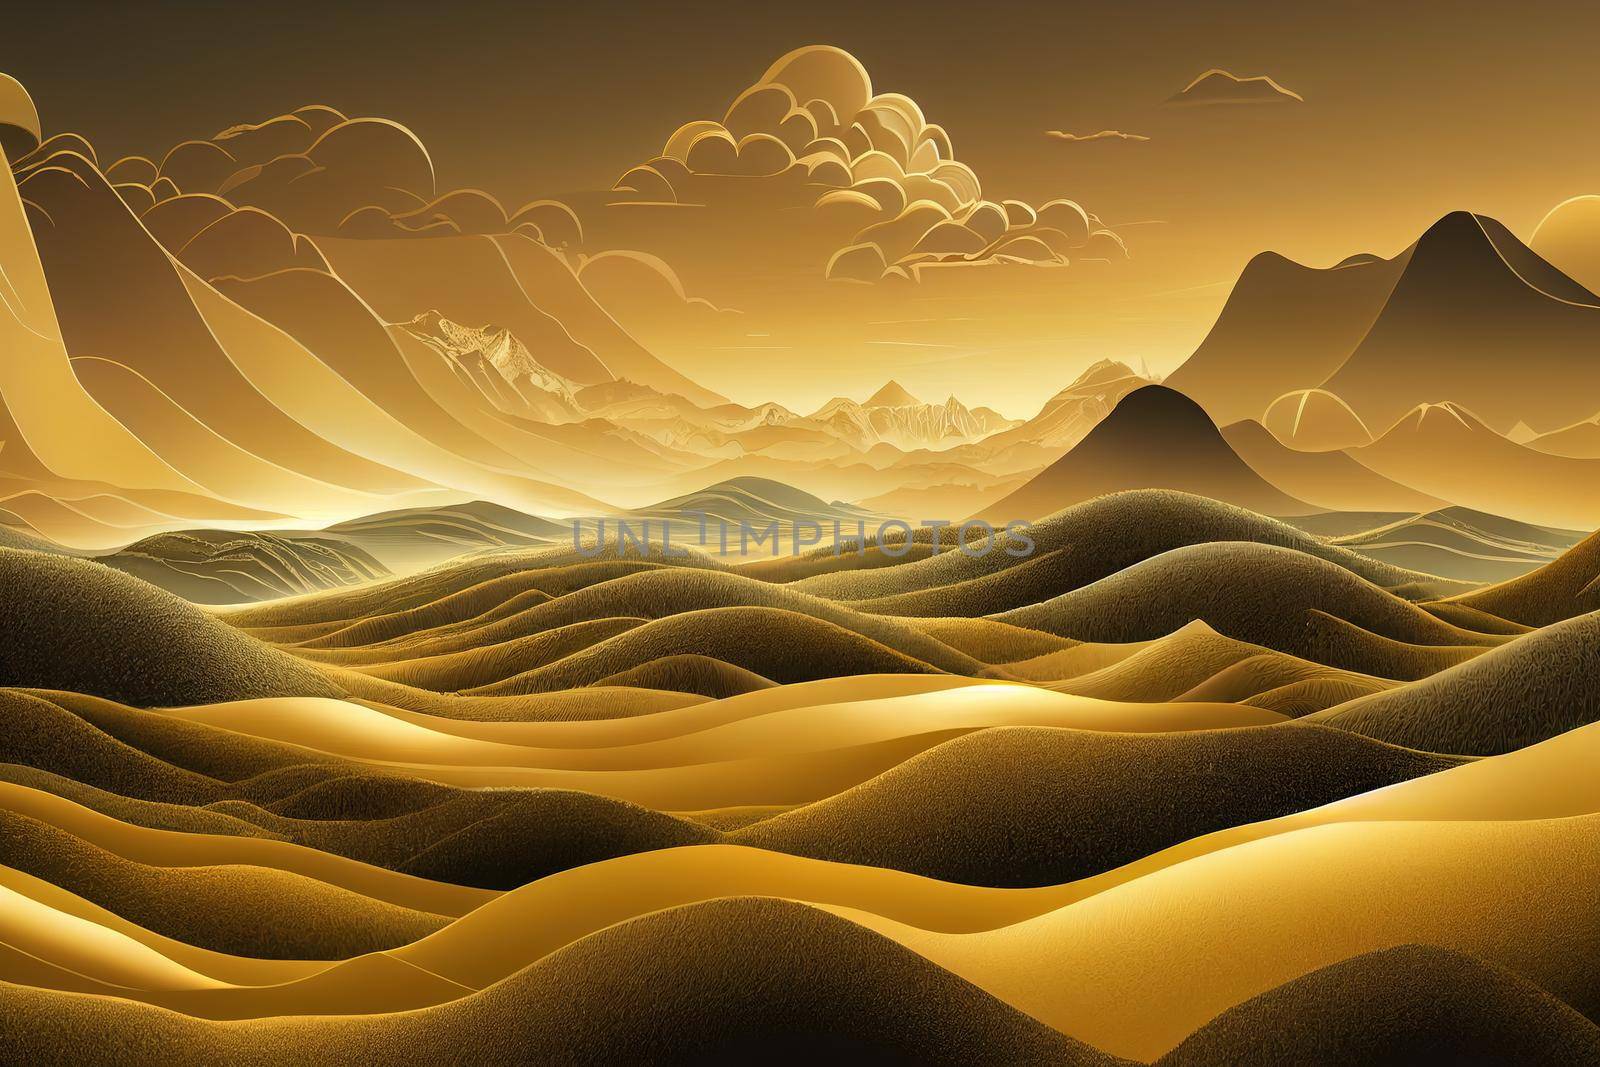 Luxury landscape art background with golden lines. with hills, mountains and sun for decoration, wallpaper, packaging, fabric. High quality illustration